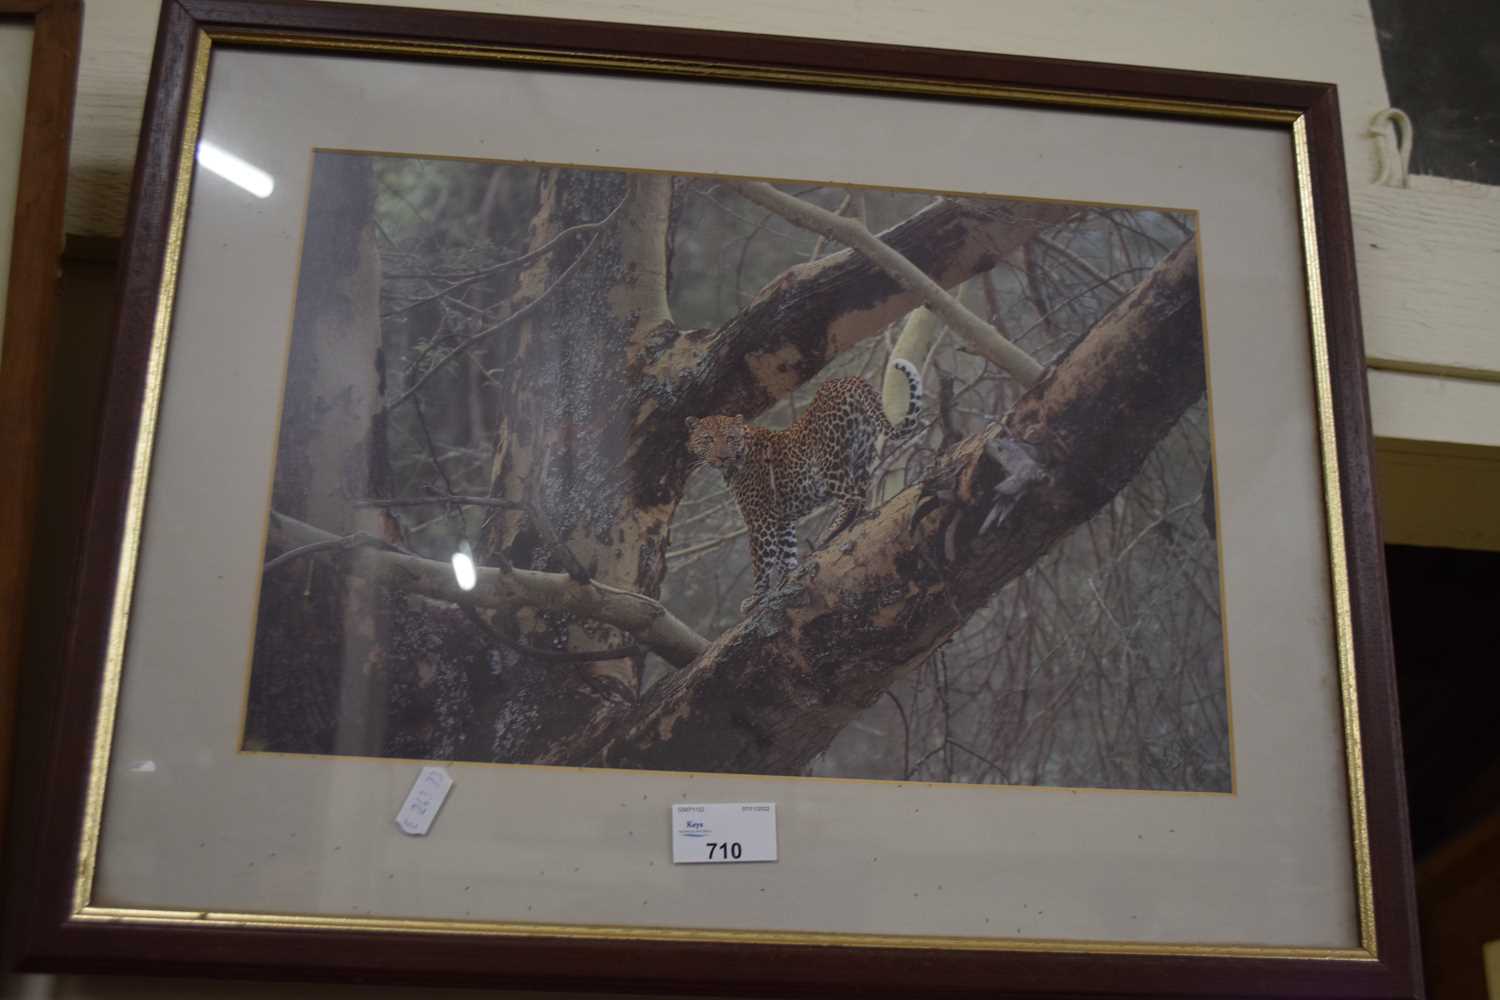 Roger Tidman, study of a leopard, photographic print limited edition 71 of 200, framed and glazed